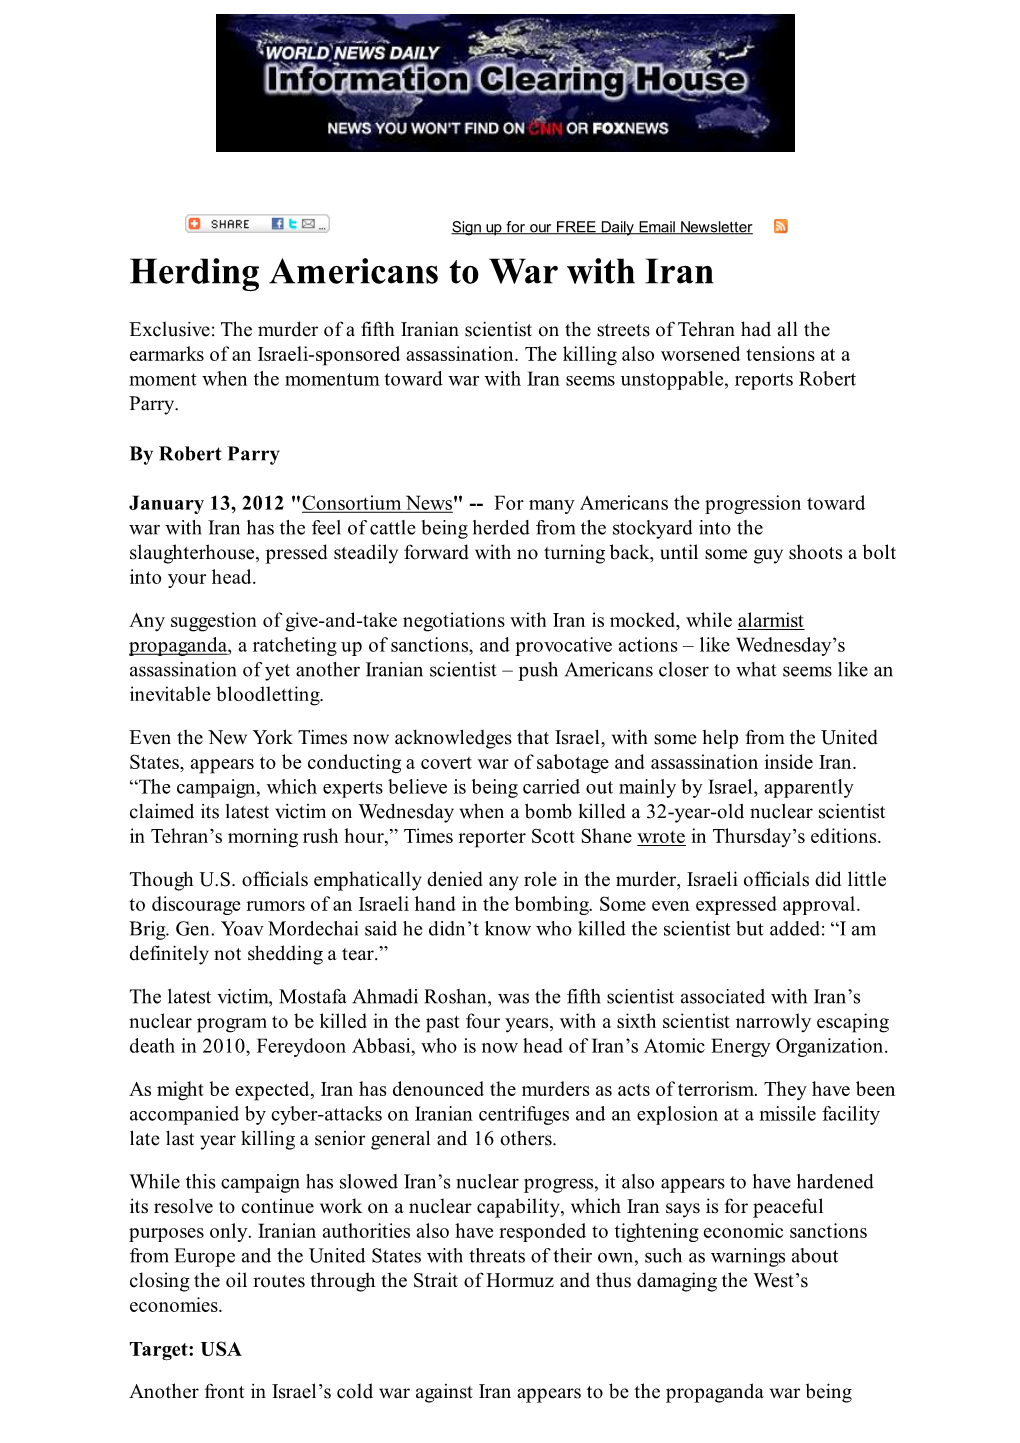 Herding Americans to War with Iran